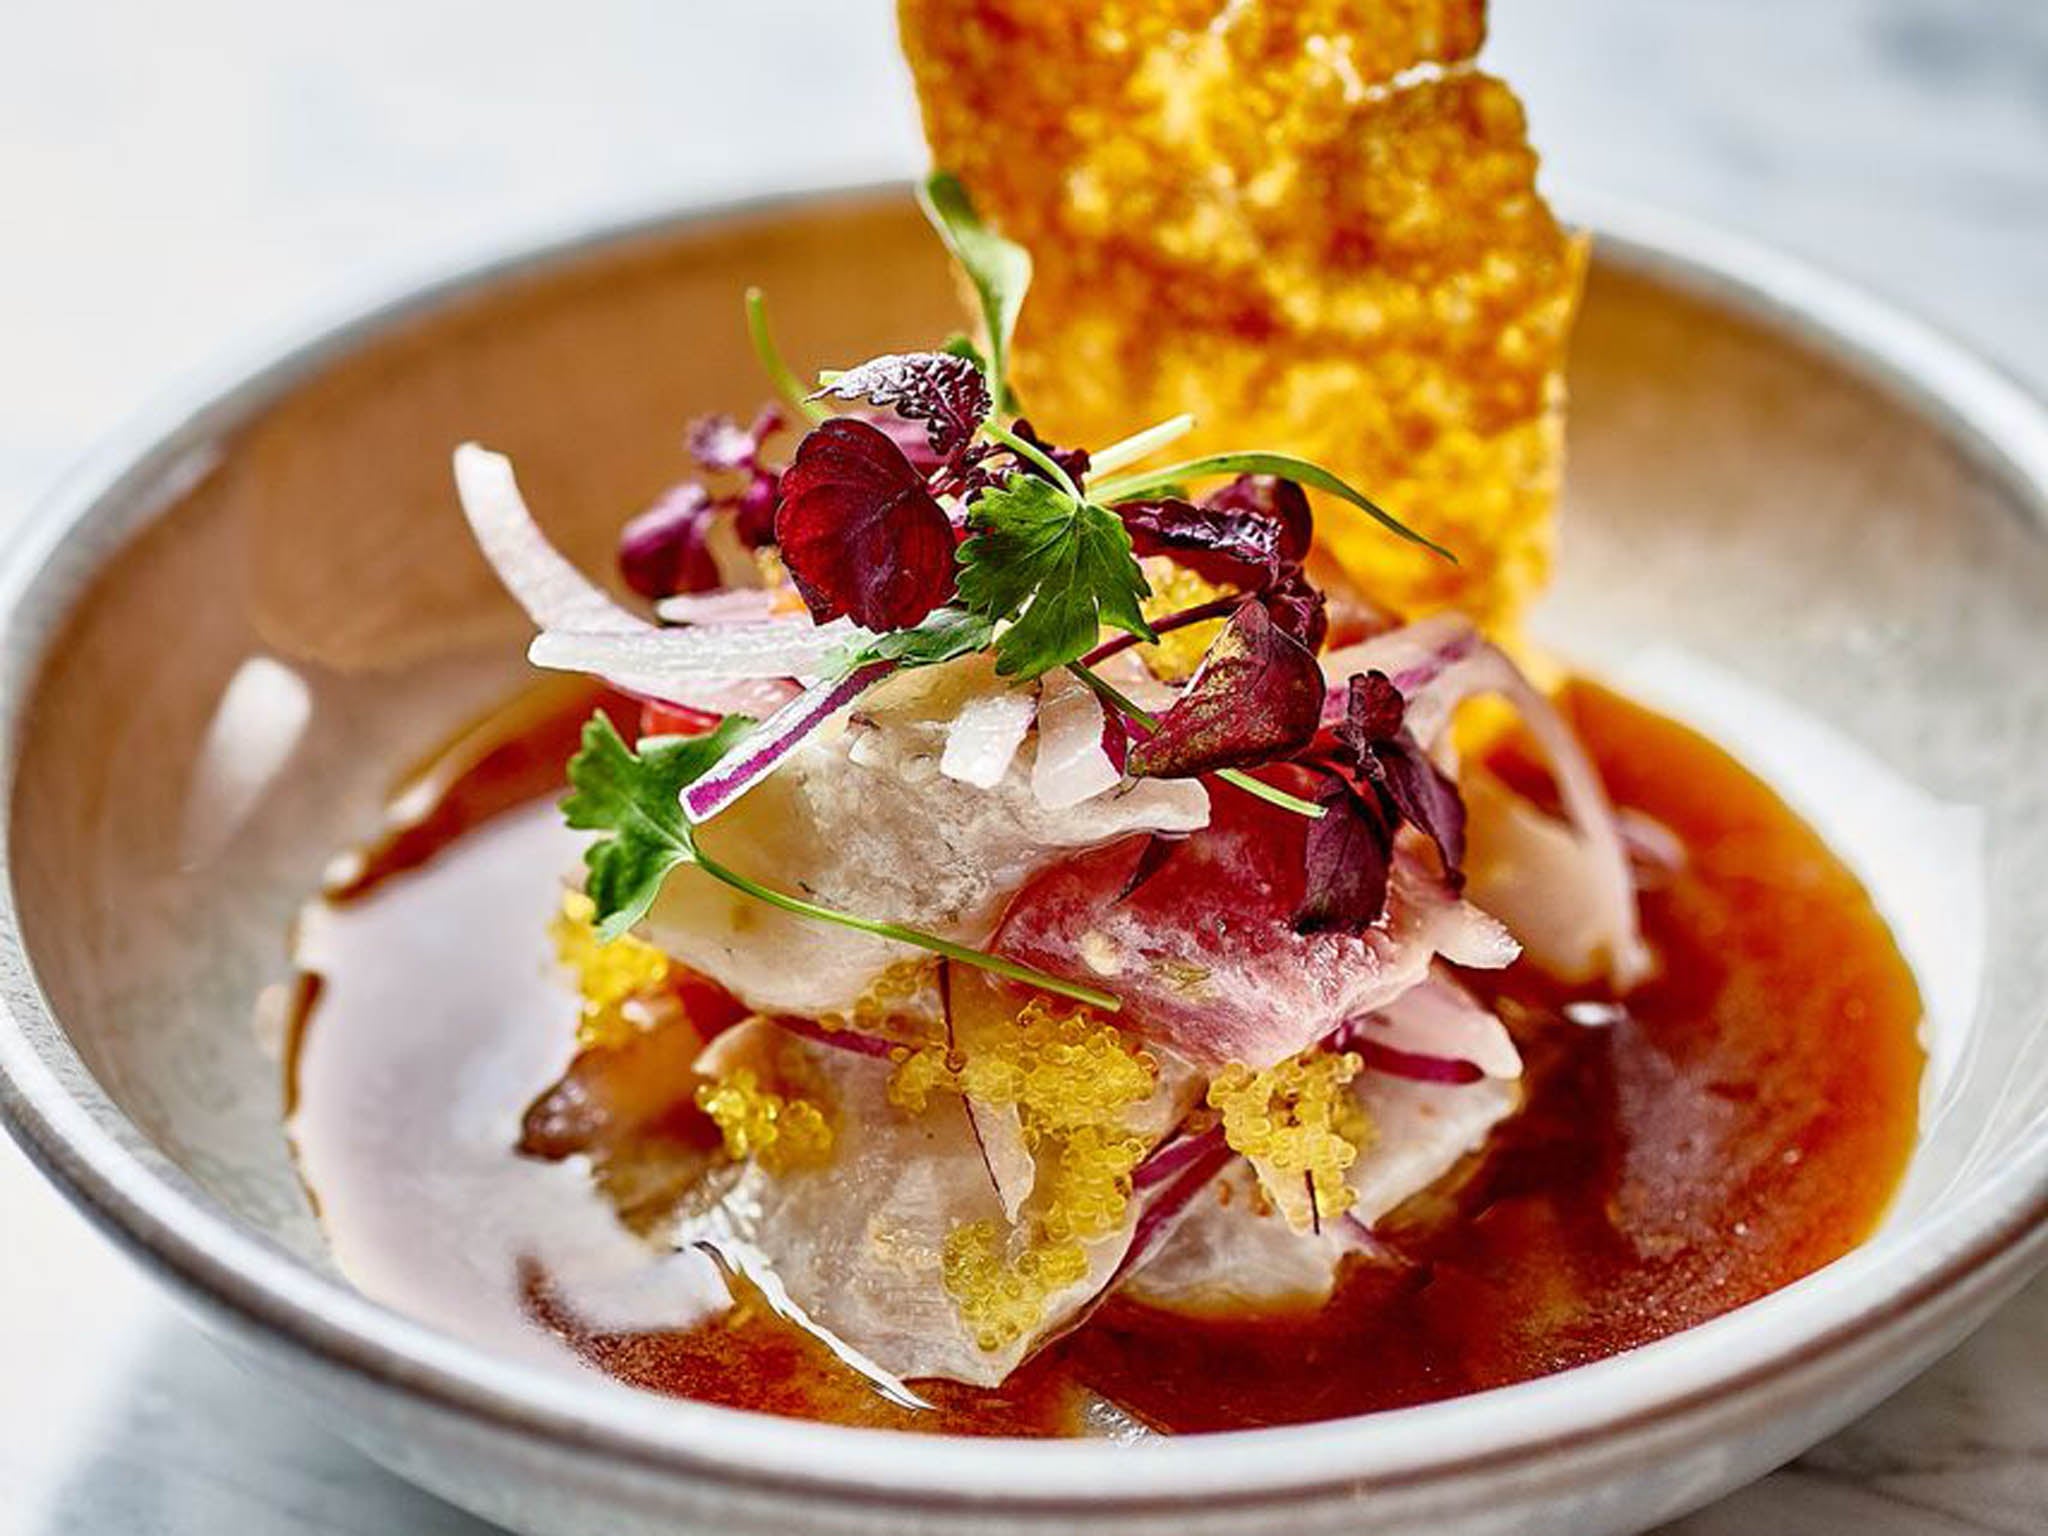 Nikkei ceviche – good, but no?match for the Peruvian version (Se?or Ceviche)